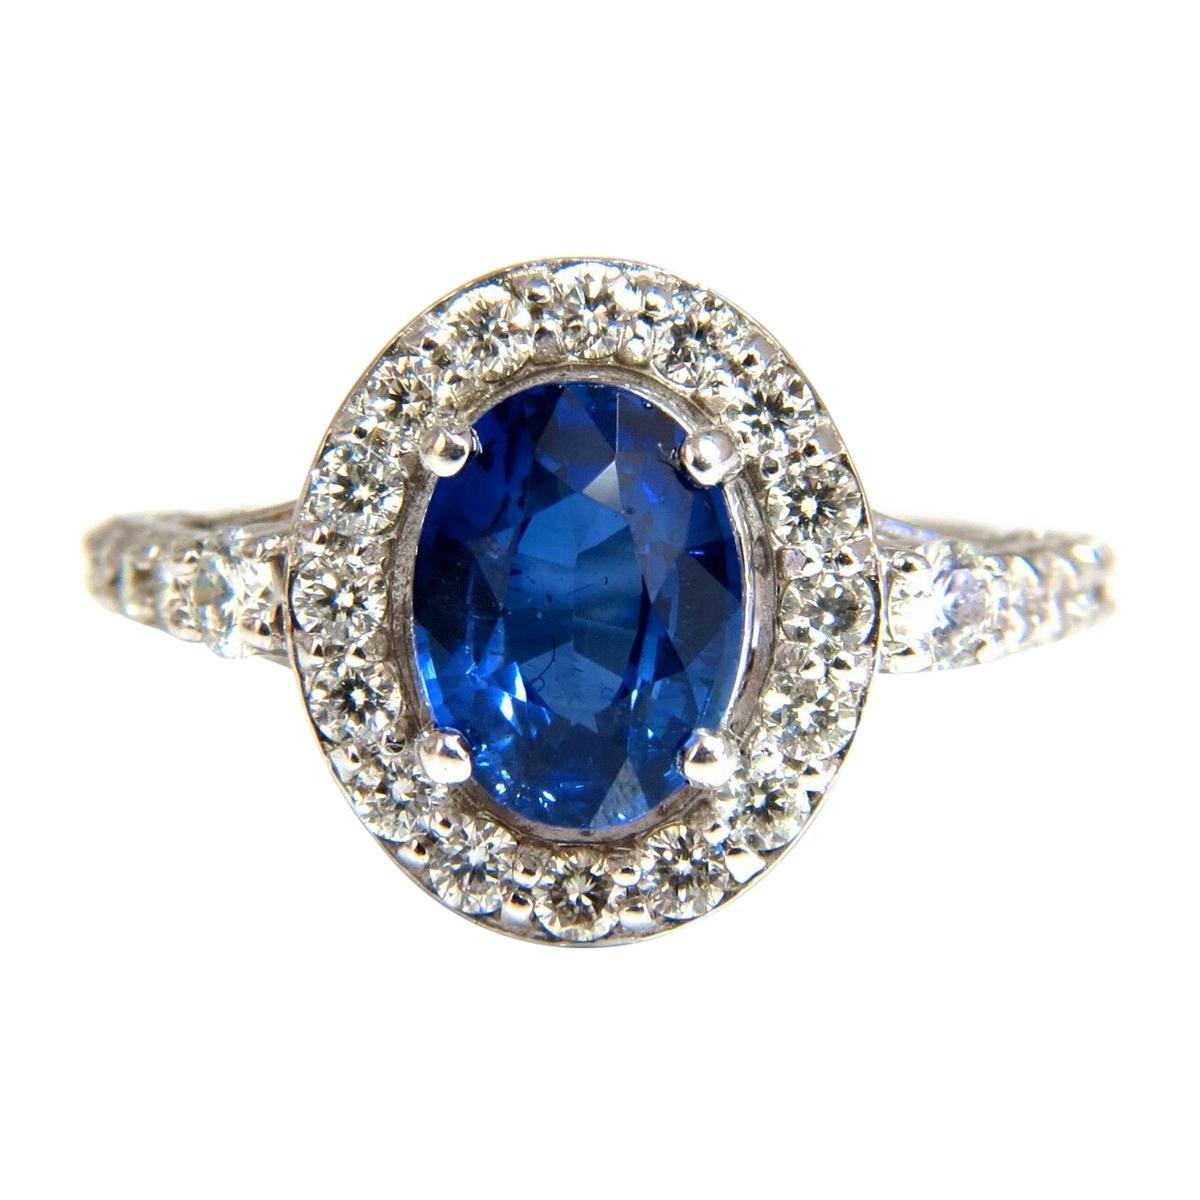 GIA Certified 3.38 Carat Natural Royal Blue Sapphire Ring Halo Cluster